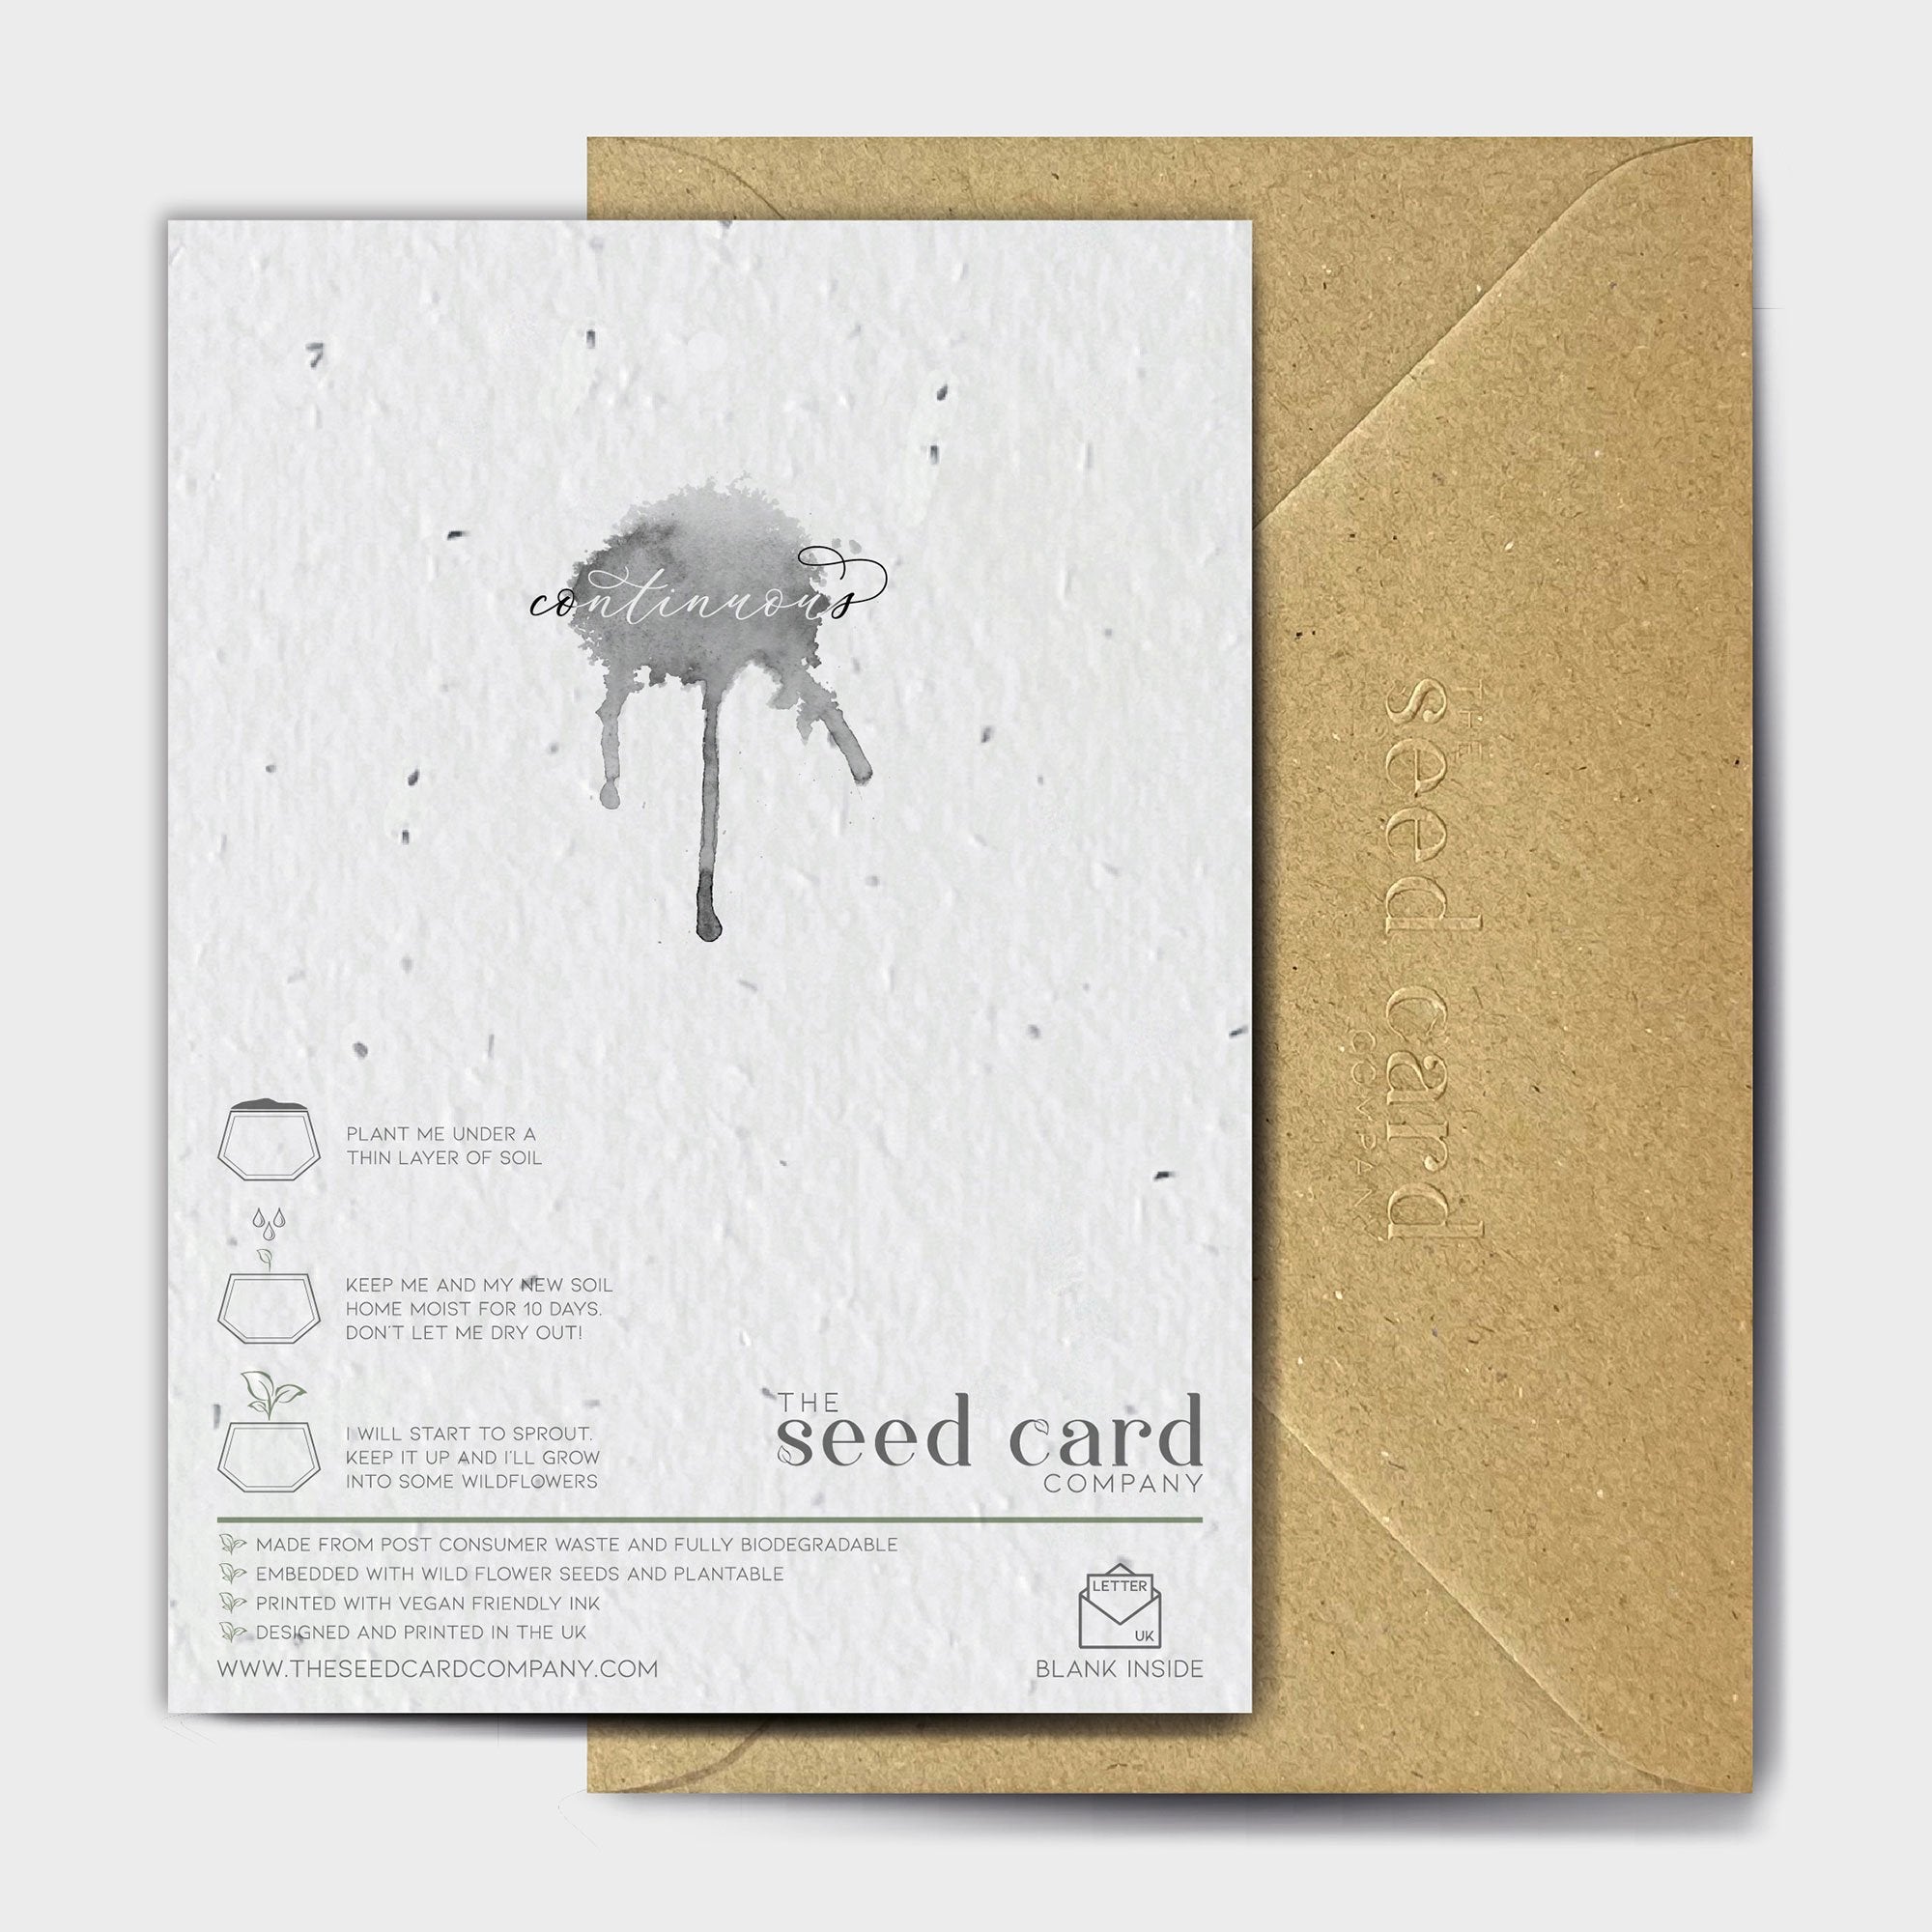 Shop online Rainbow In Flight - 100% biodegradable seed-embedded cards Shop -The Seed Card Company